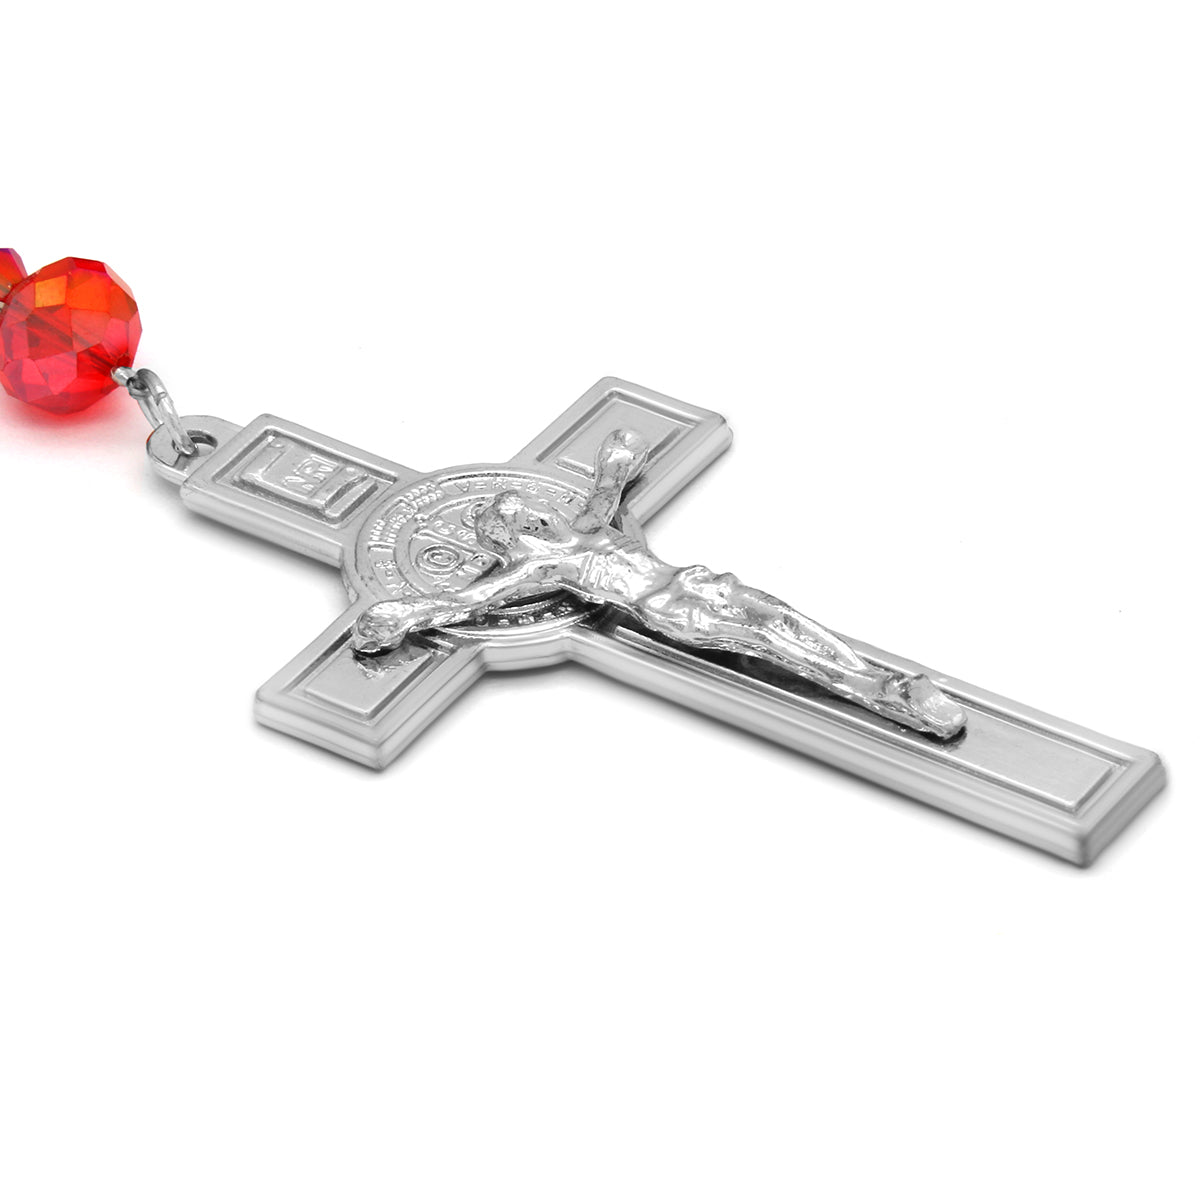 Light Red Crystal Line Rosary With Cross Pendant